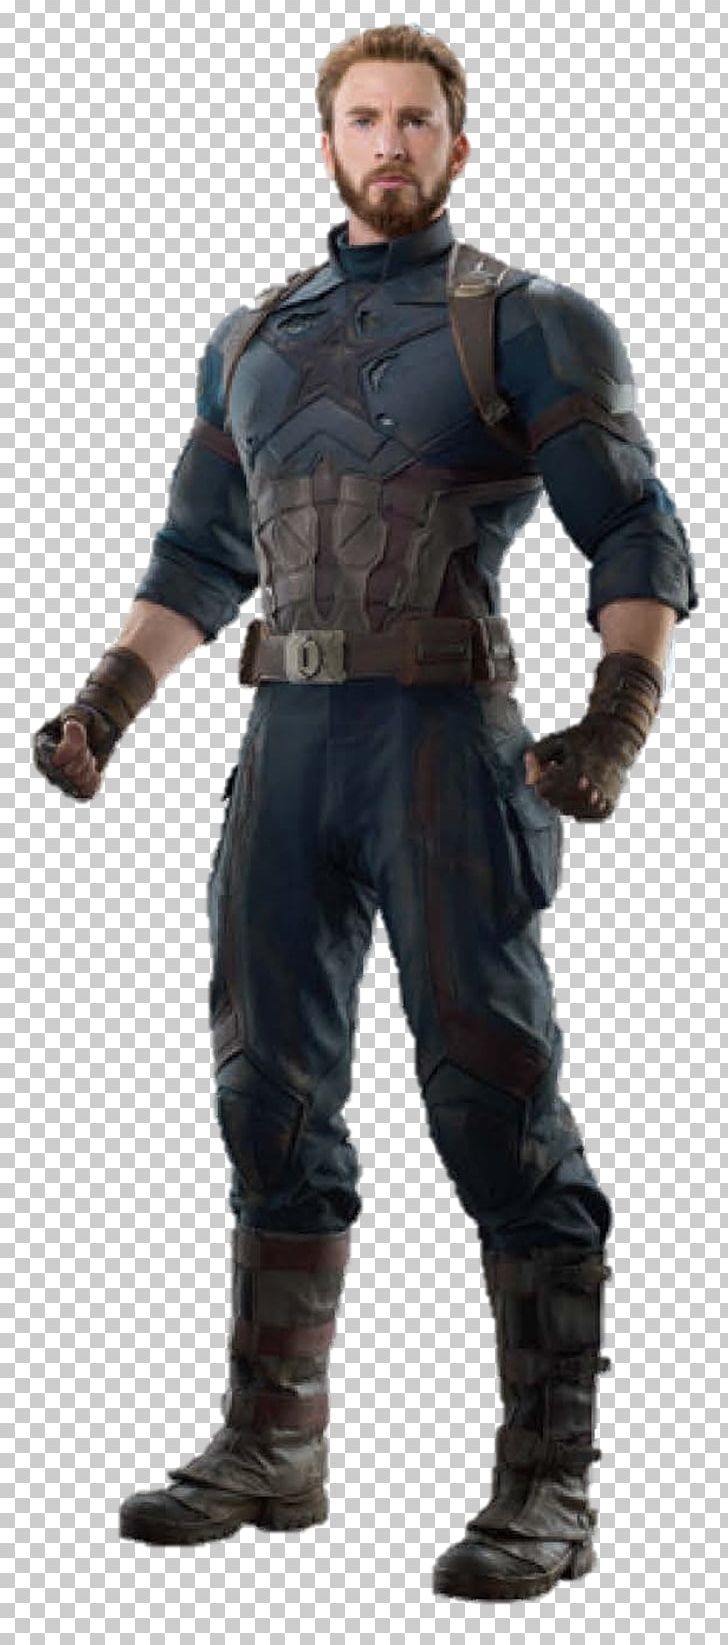 Bucky Barnes Captain America: The Winter Soldier Wanda Maximoff PNG, Clipart, Action Figure, Avengers Age Of Ultron, Avengers Infinity War, Buck, Captain America Free PNG Download